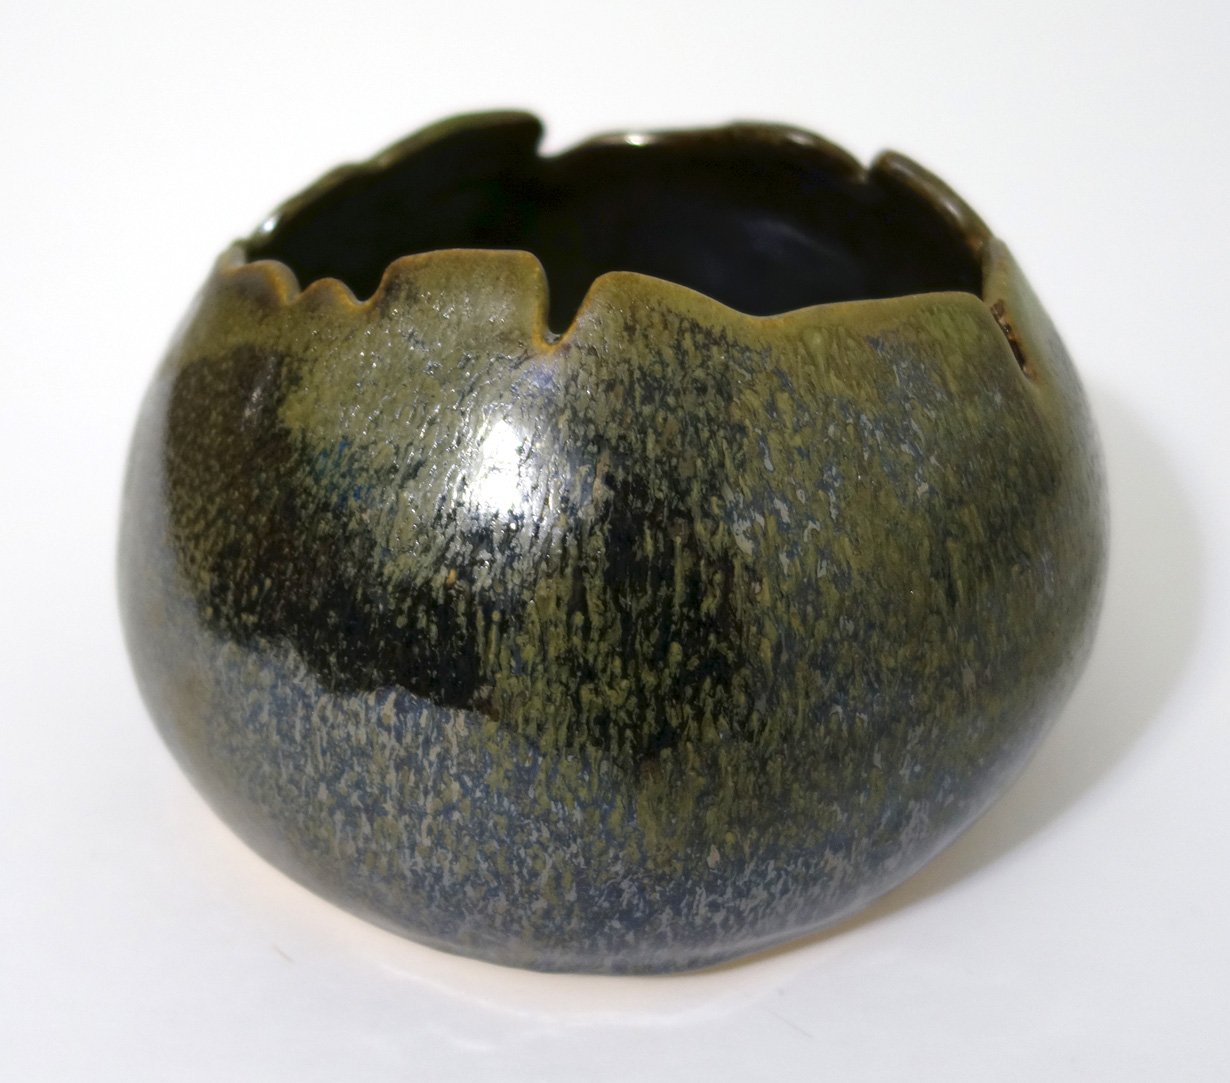 Handmade round black  blistered stoneware ceramic watering pot with black and golden glossy glaze